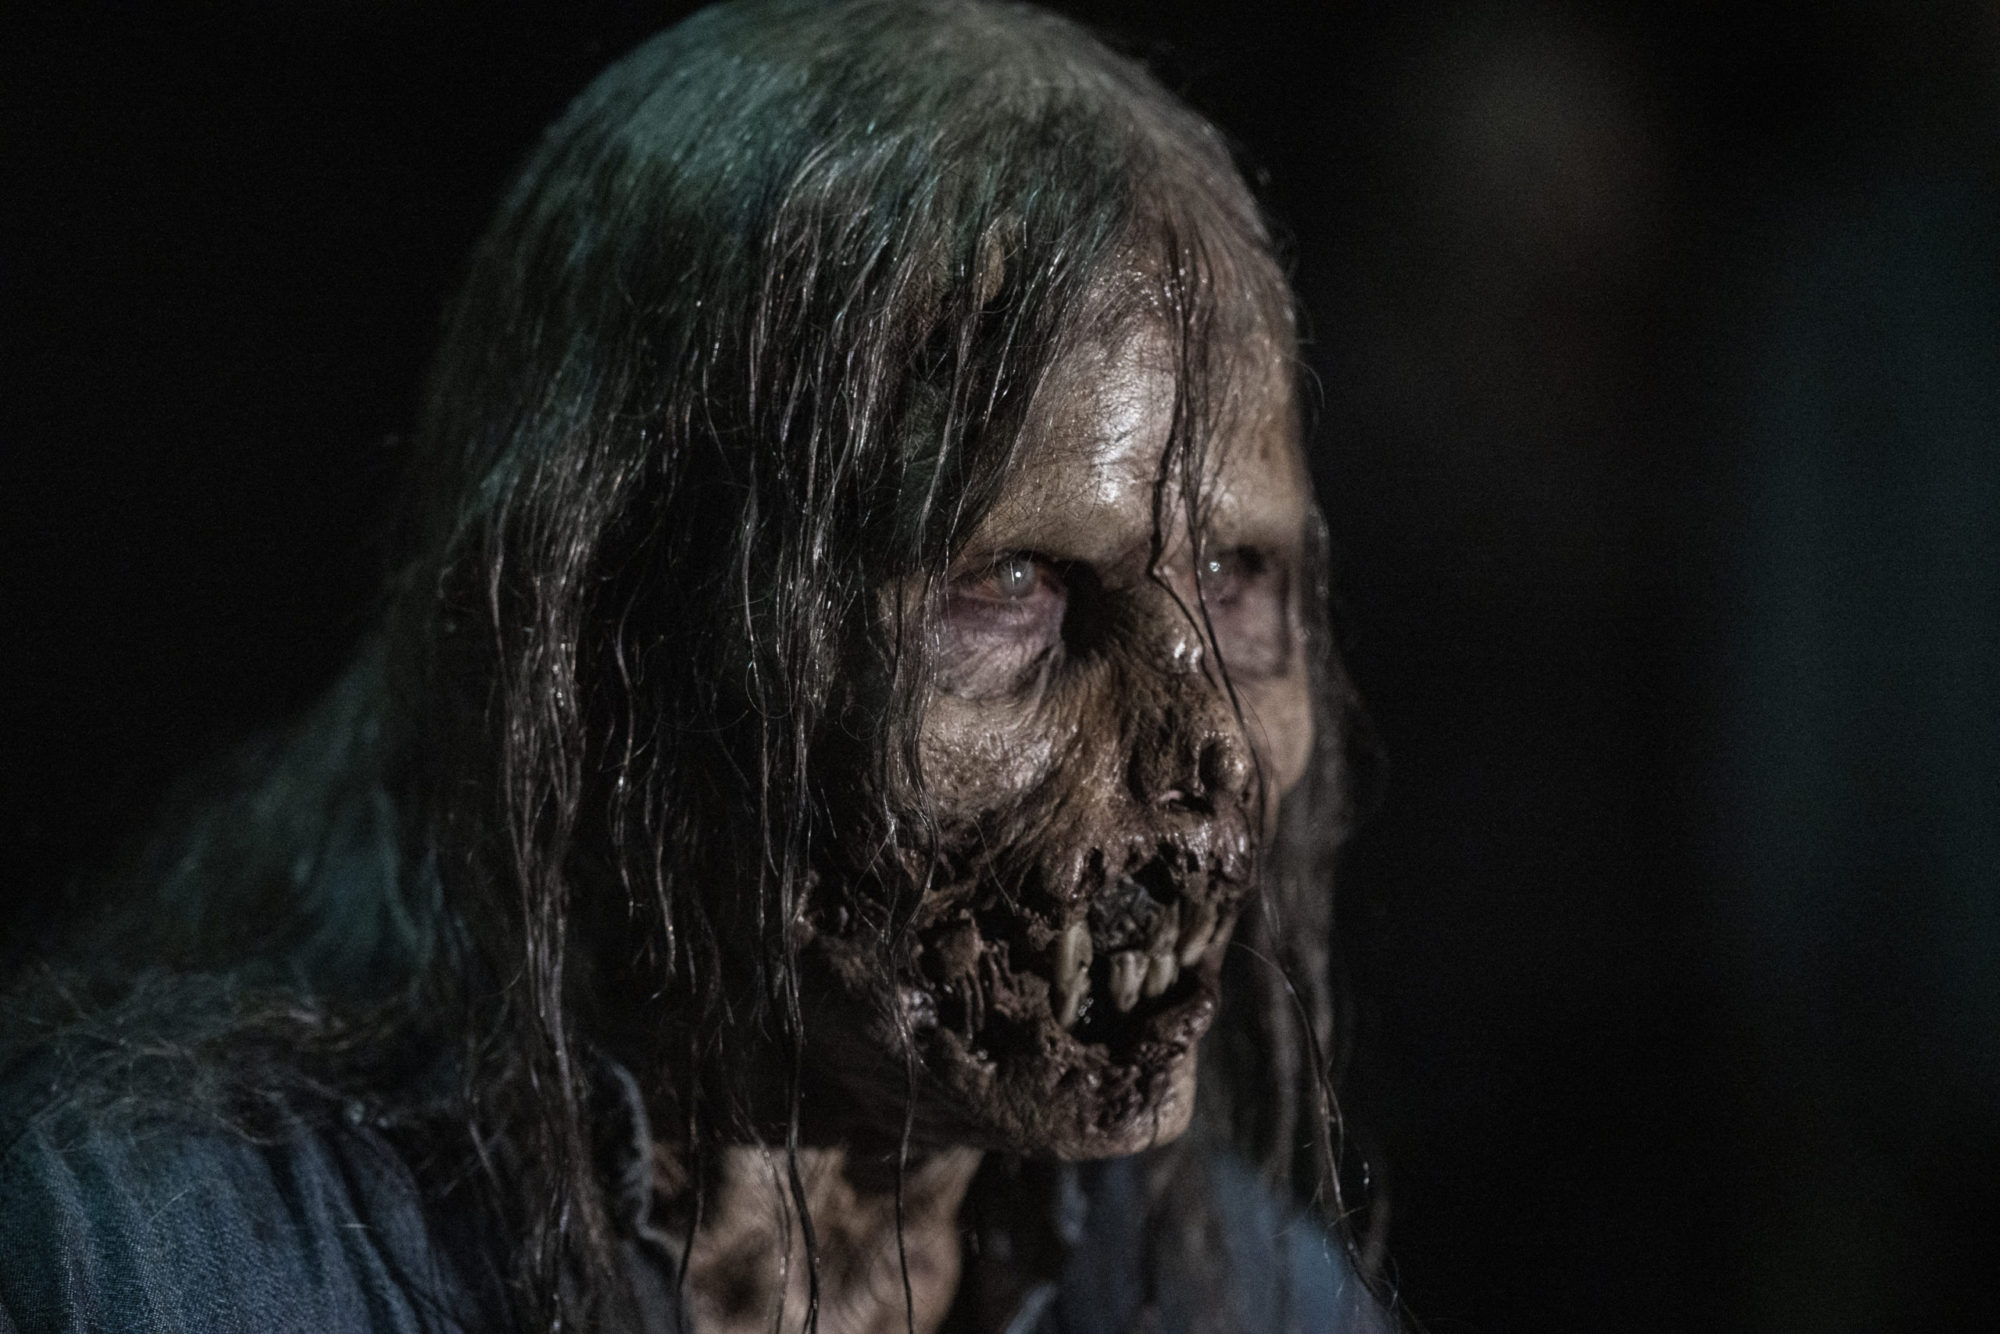 The Walking Dead: Dead City” Review - Slow Start for NYC Spinoff